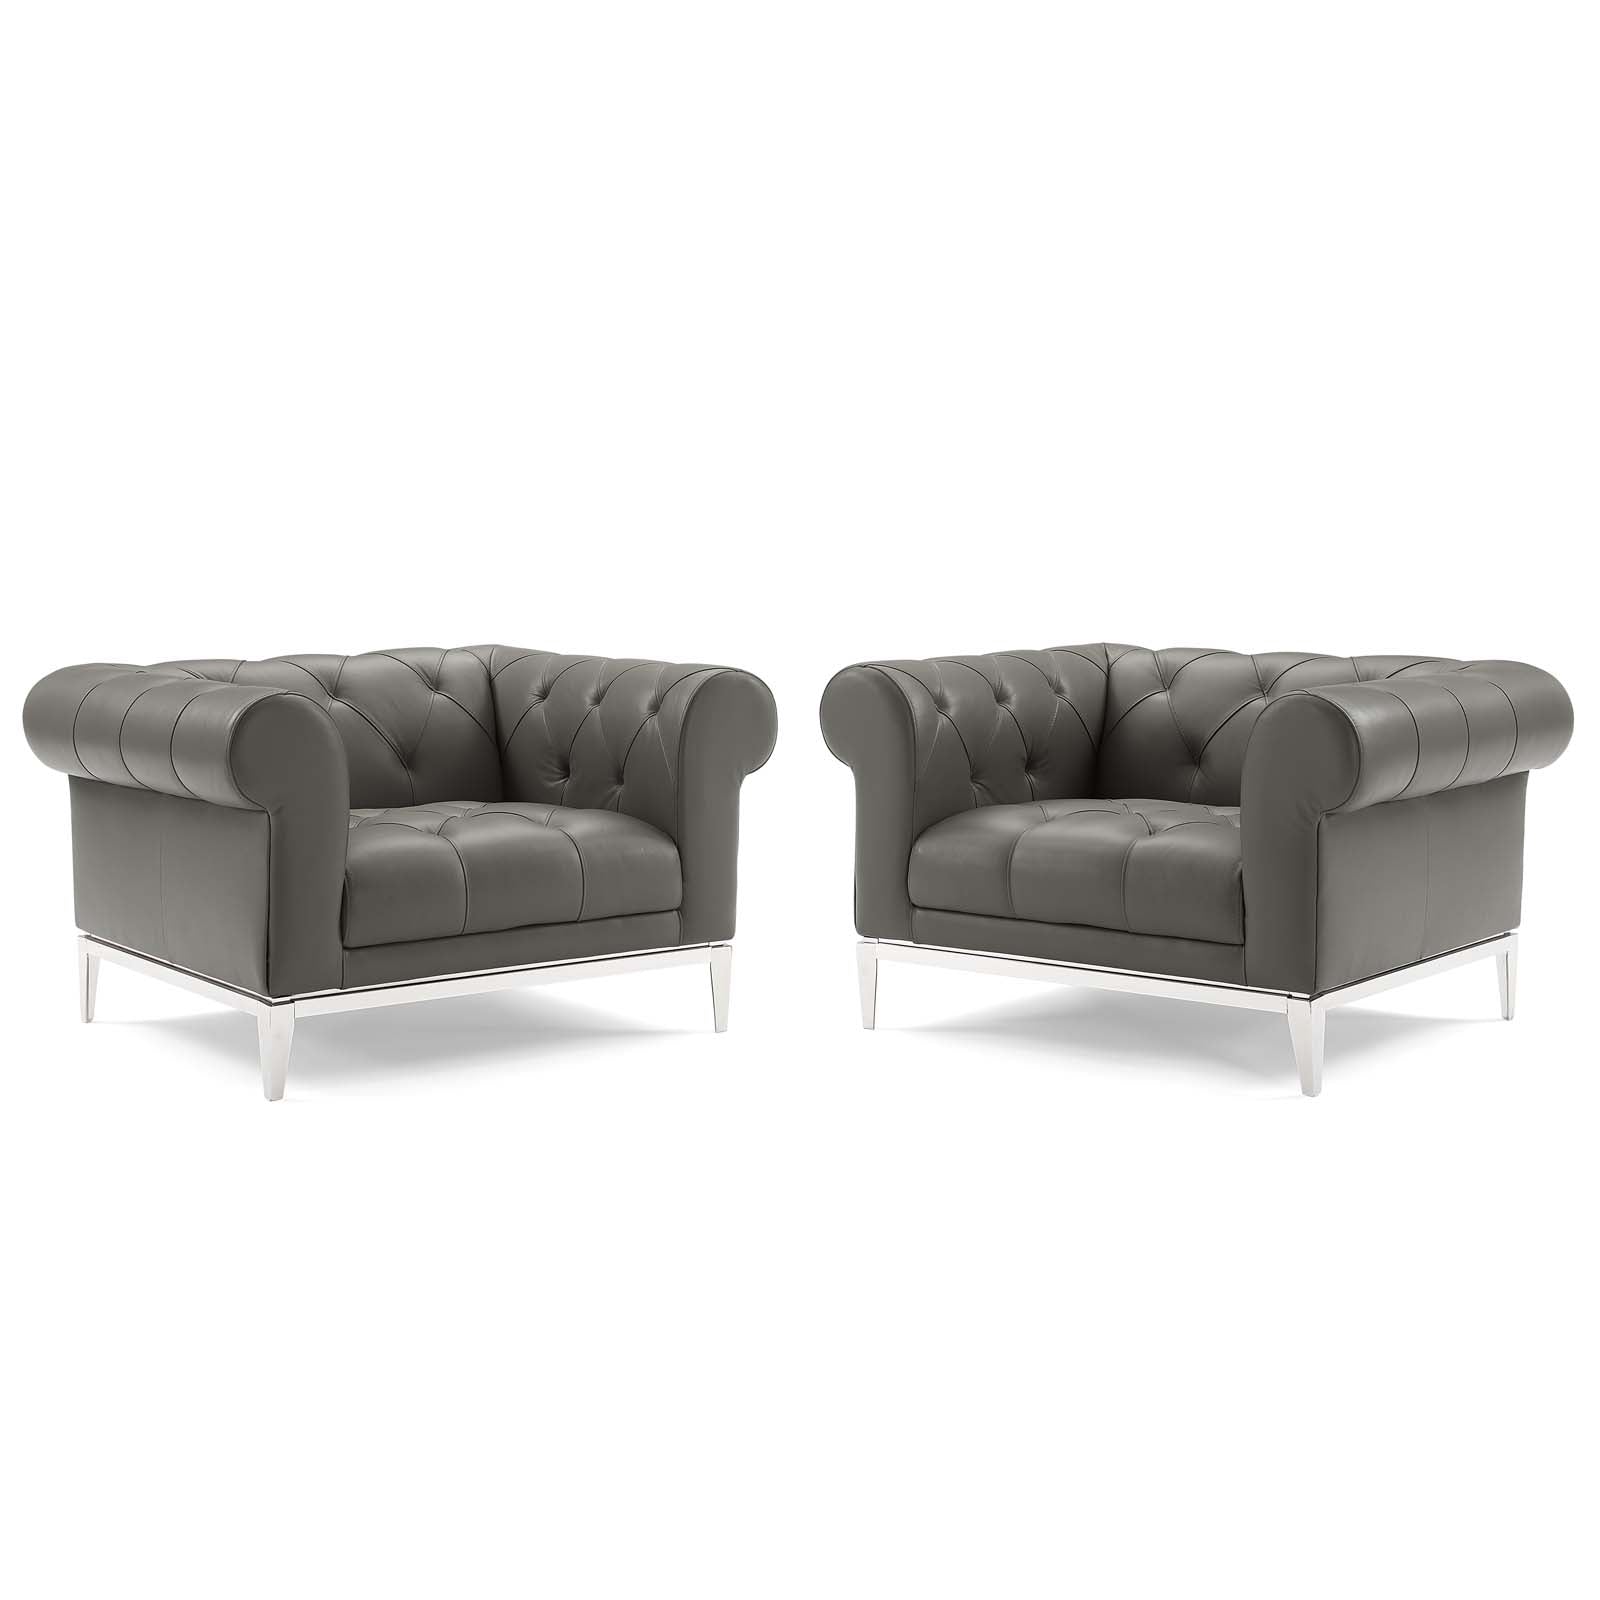 Modway Living Room Sets - Idyll-Tufted-Upholstered-Leather-Armchair-Set-of-2-Gray